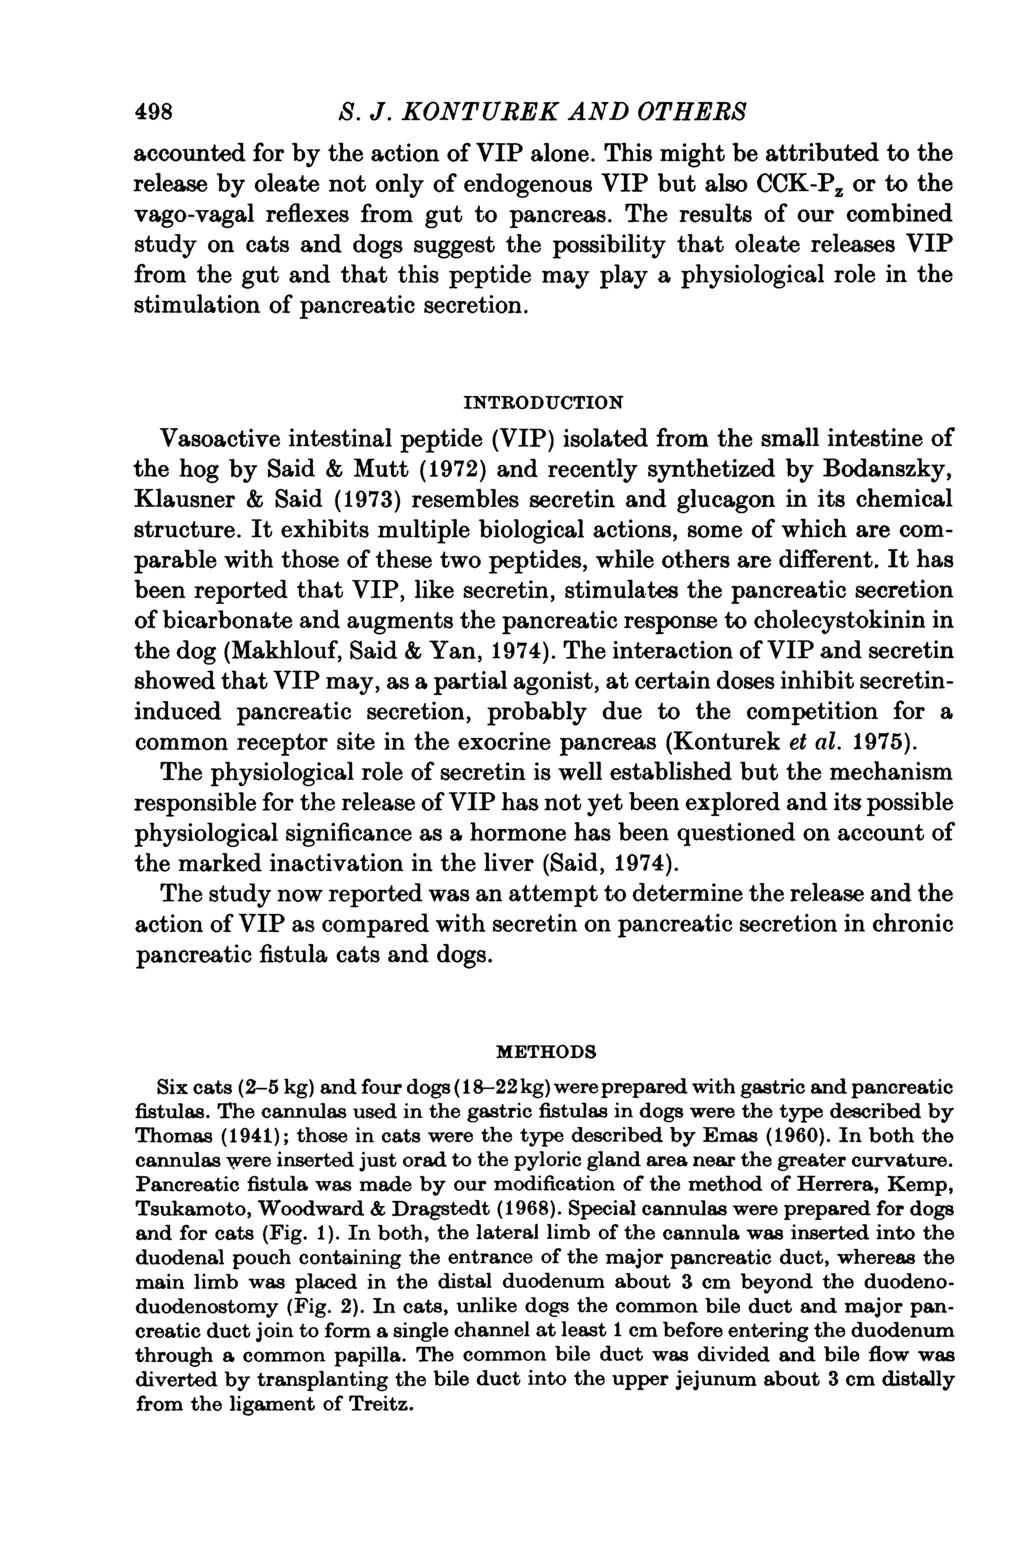 498 S. J. KONTURK AND OTHRS accounted for by the action of VP alone. This might be attributed to the release by oleate not only of endogenous VP but also CCK-P.